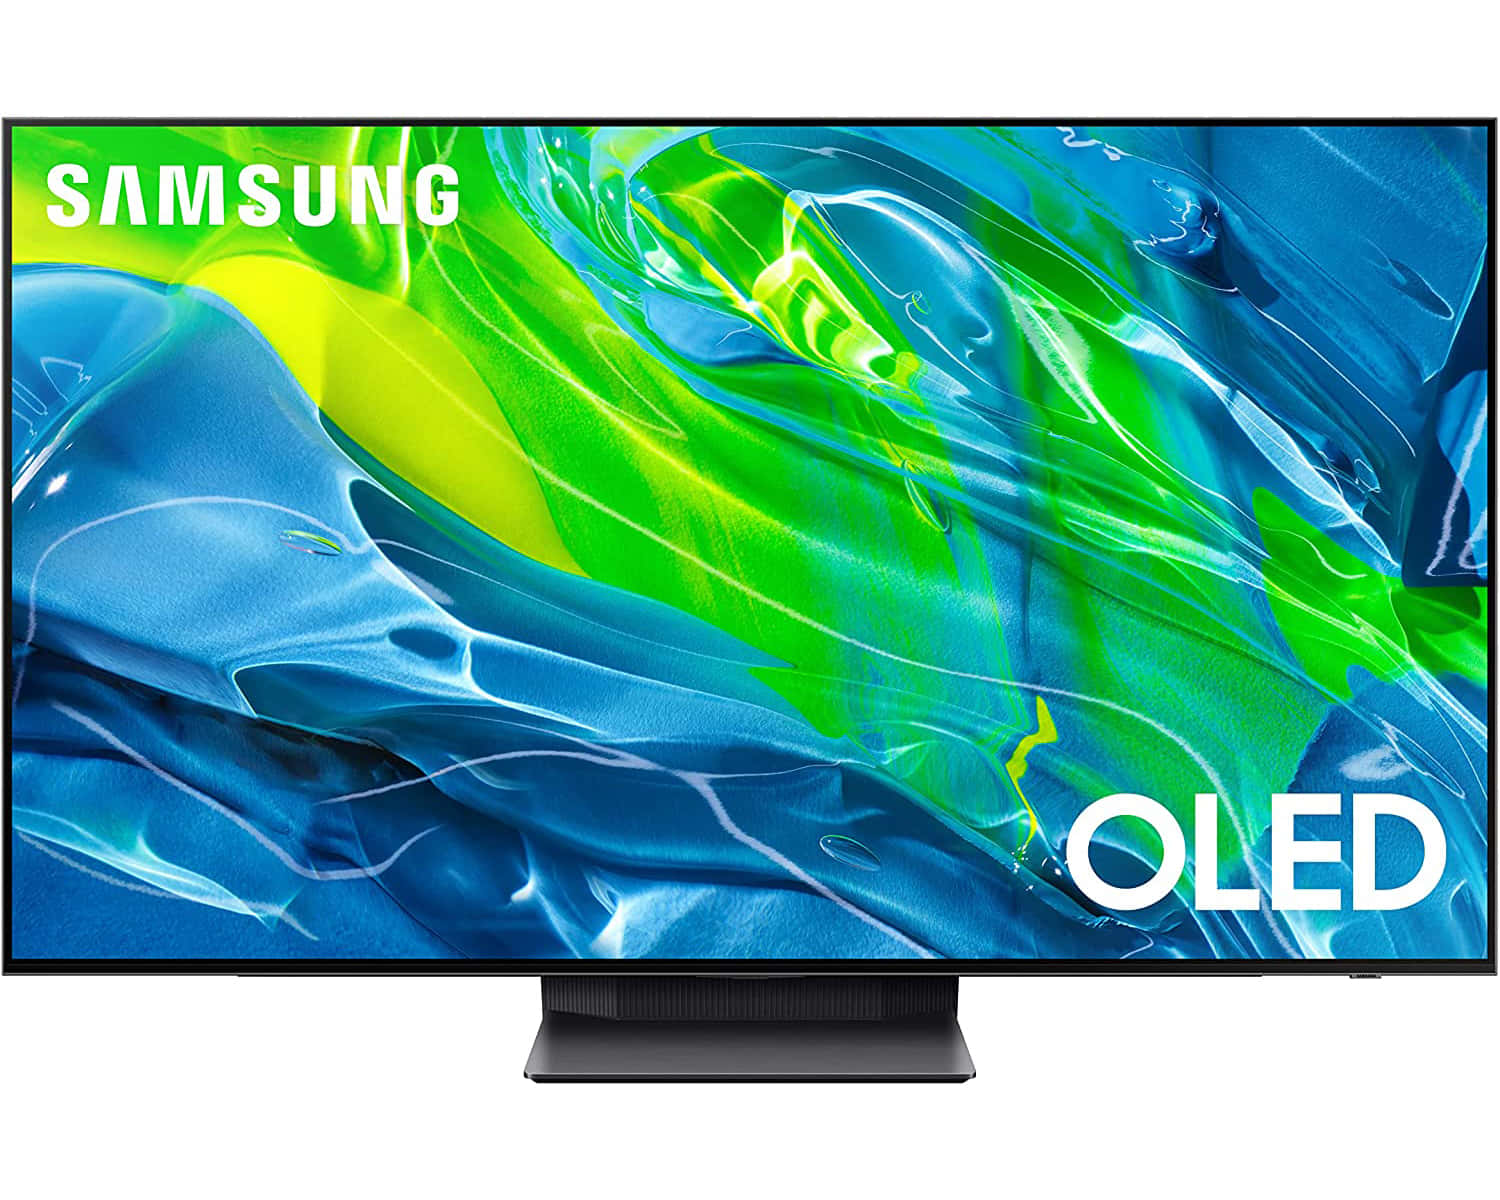 Samsung Oled Monitor Picture